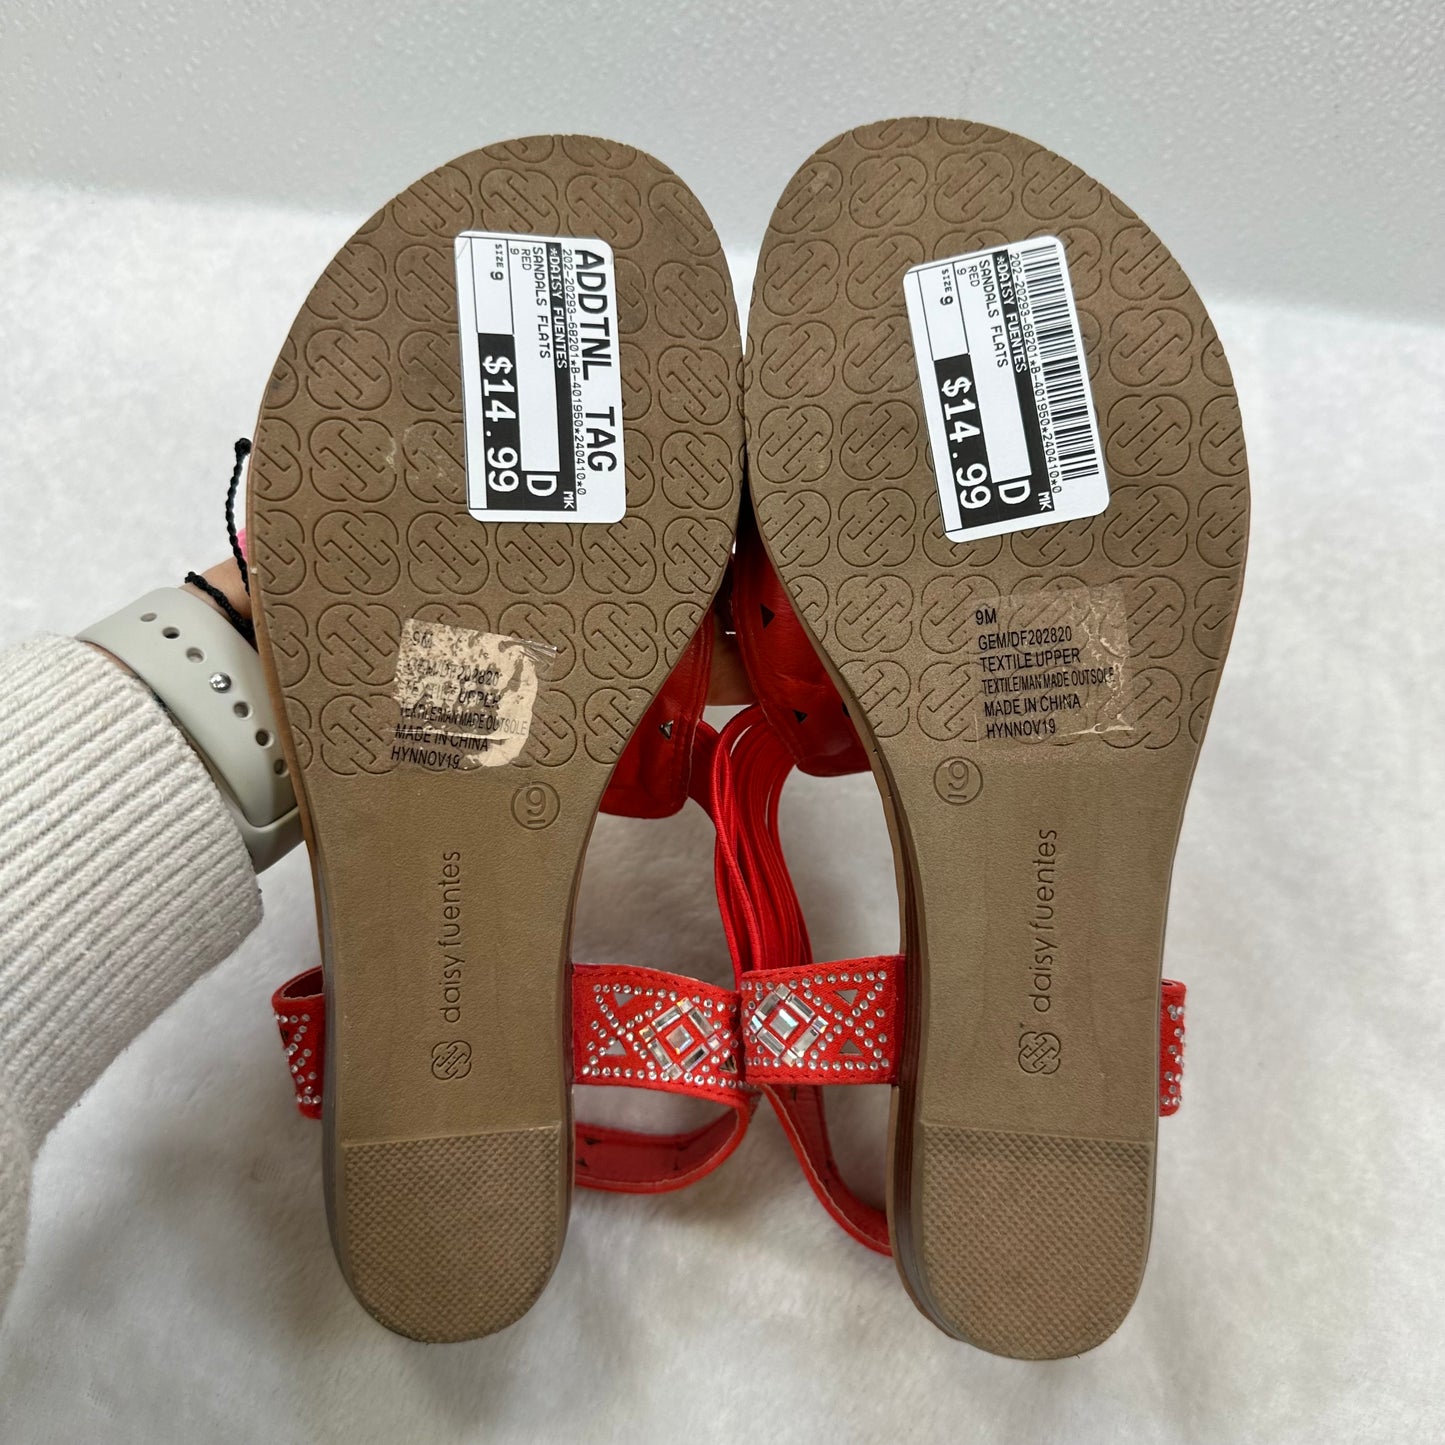 Sandals Flats By Daisy Fuentes  Size: 9